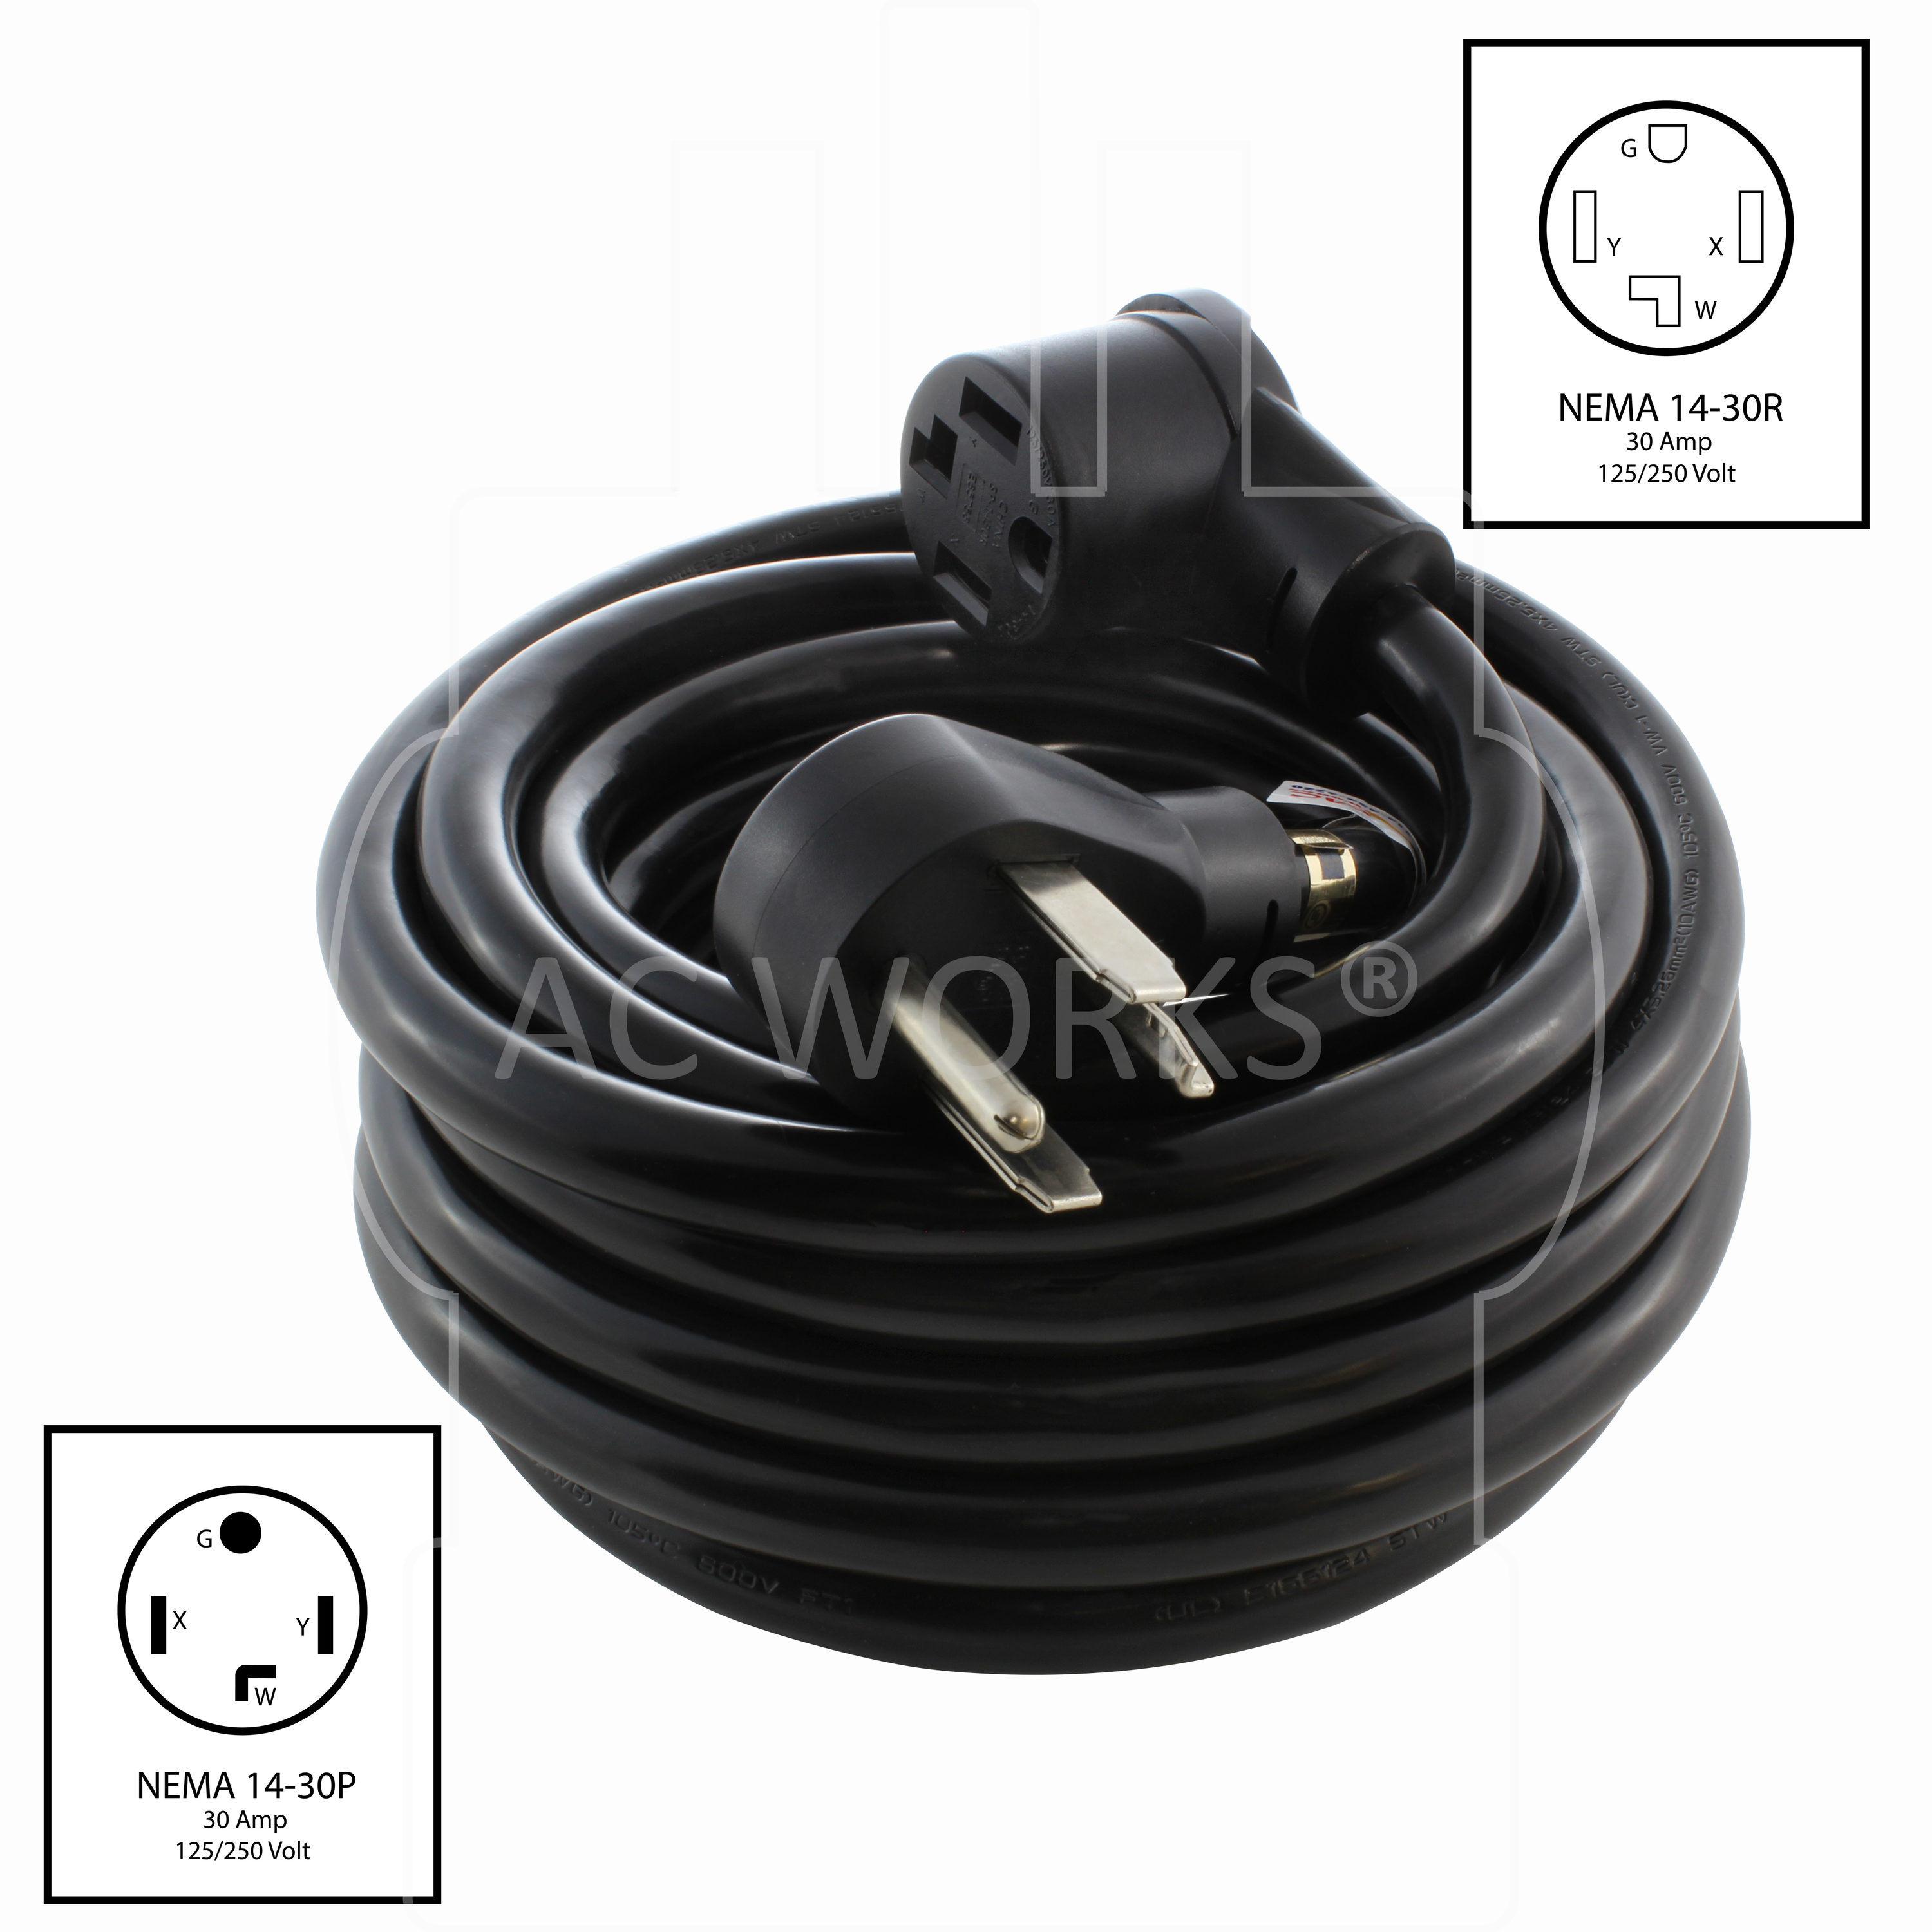 125V / 3750W 55193 Features a Flexible Camco 25ft 30-Amp RV Extension Cord Safe and Durable Construction 10-Gauge 